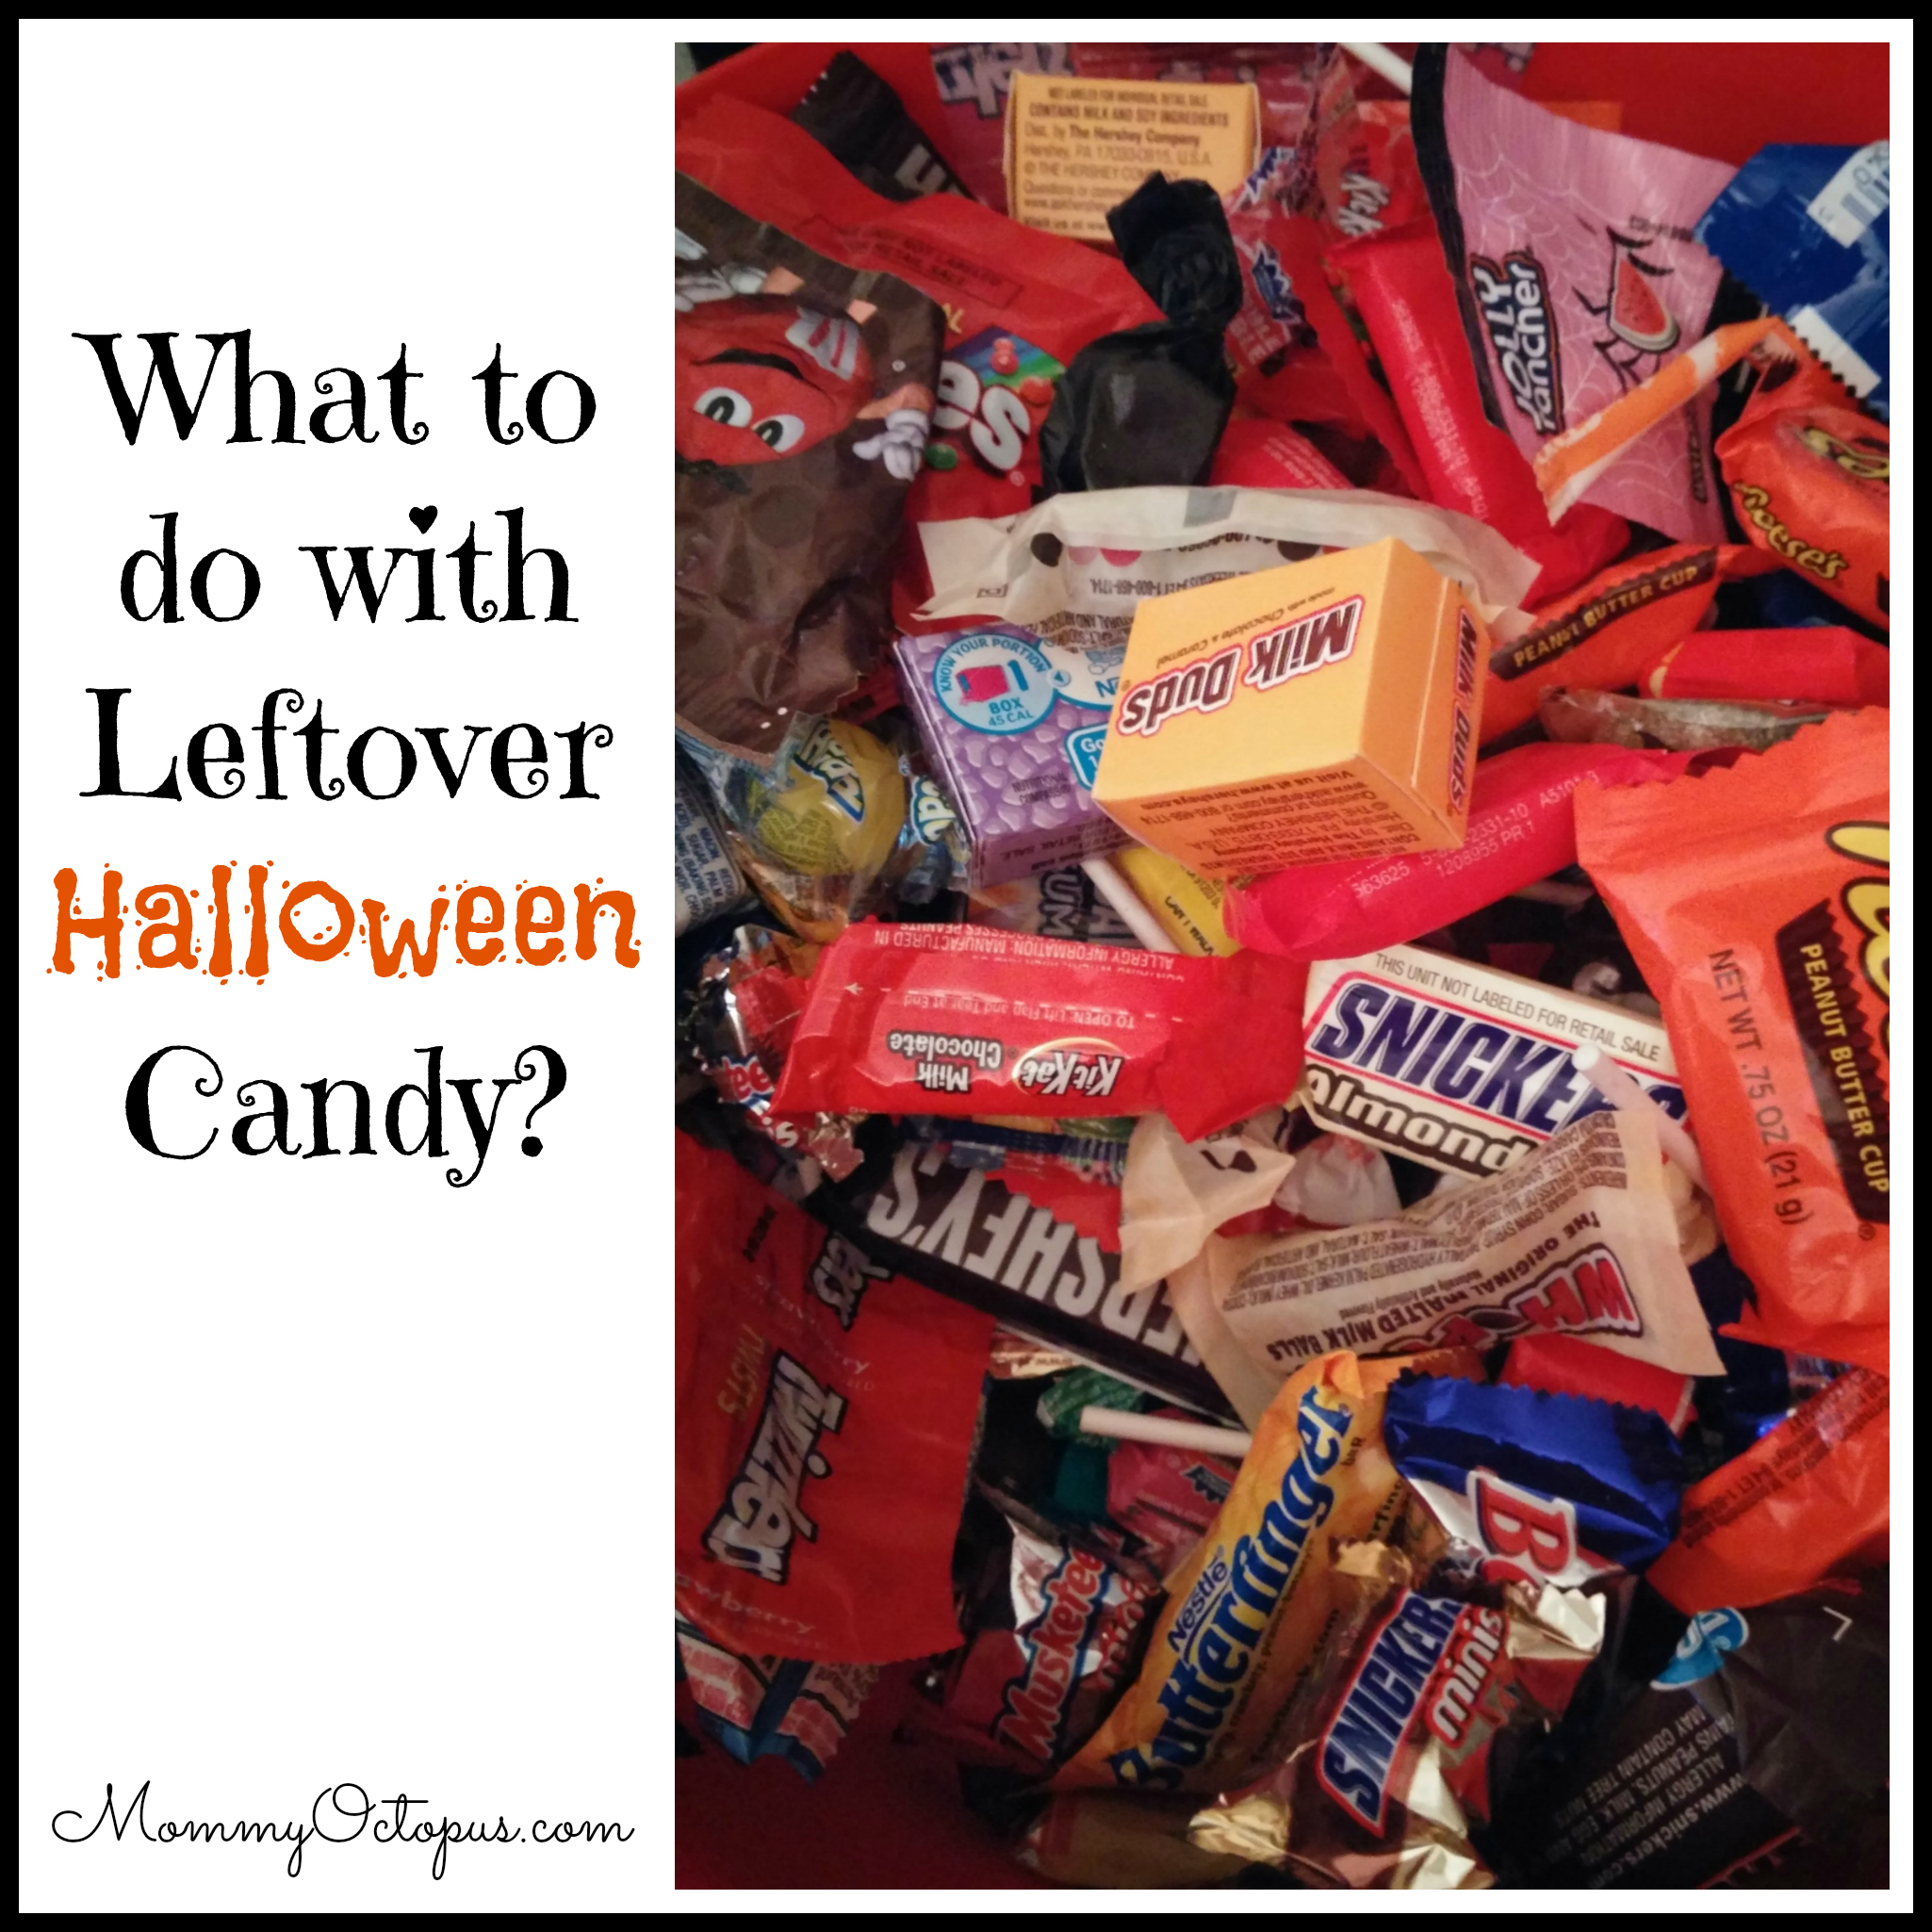 What to do with Leftover Halloween Candy